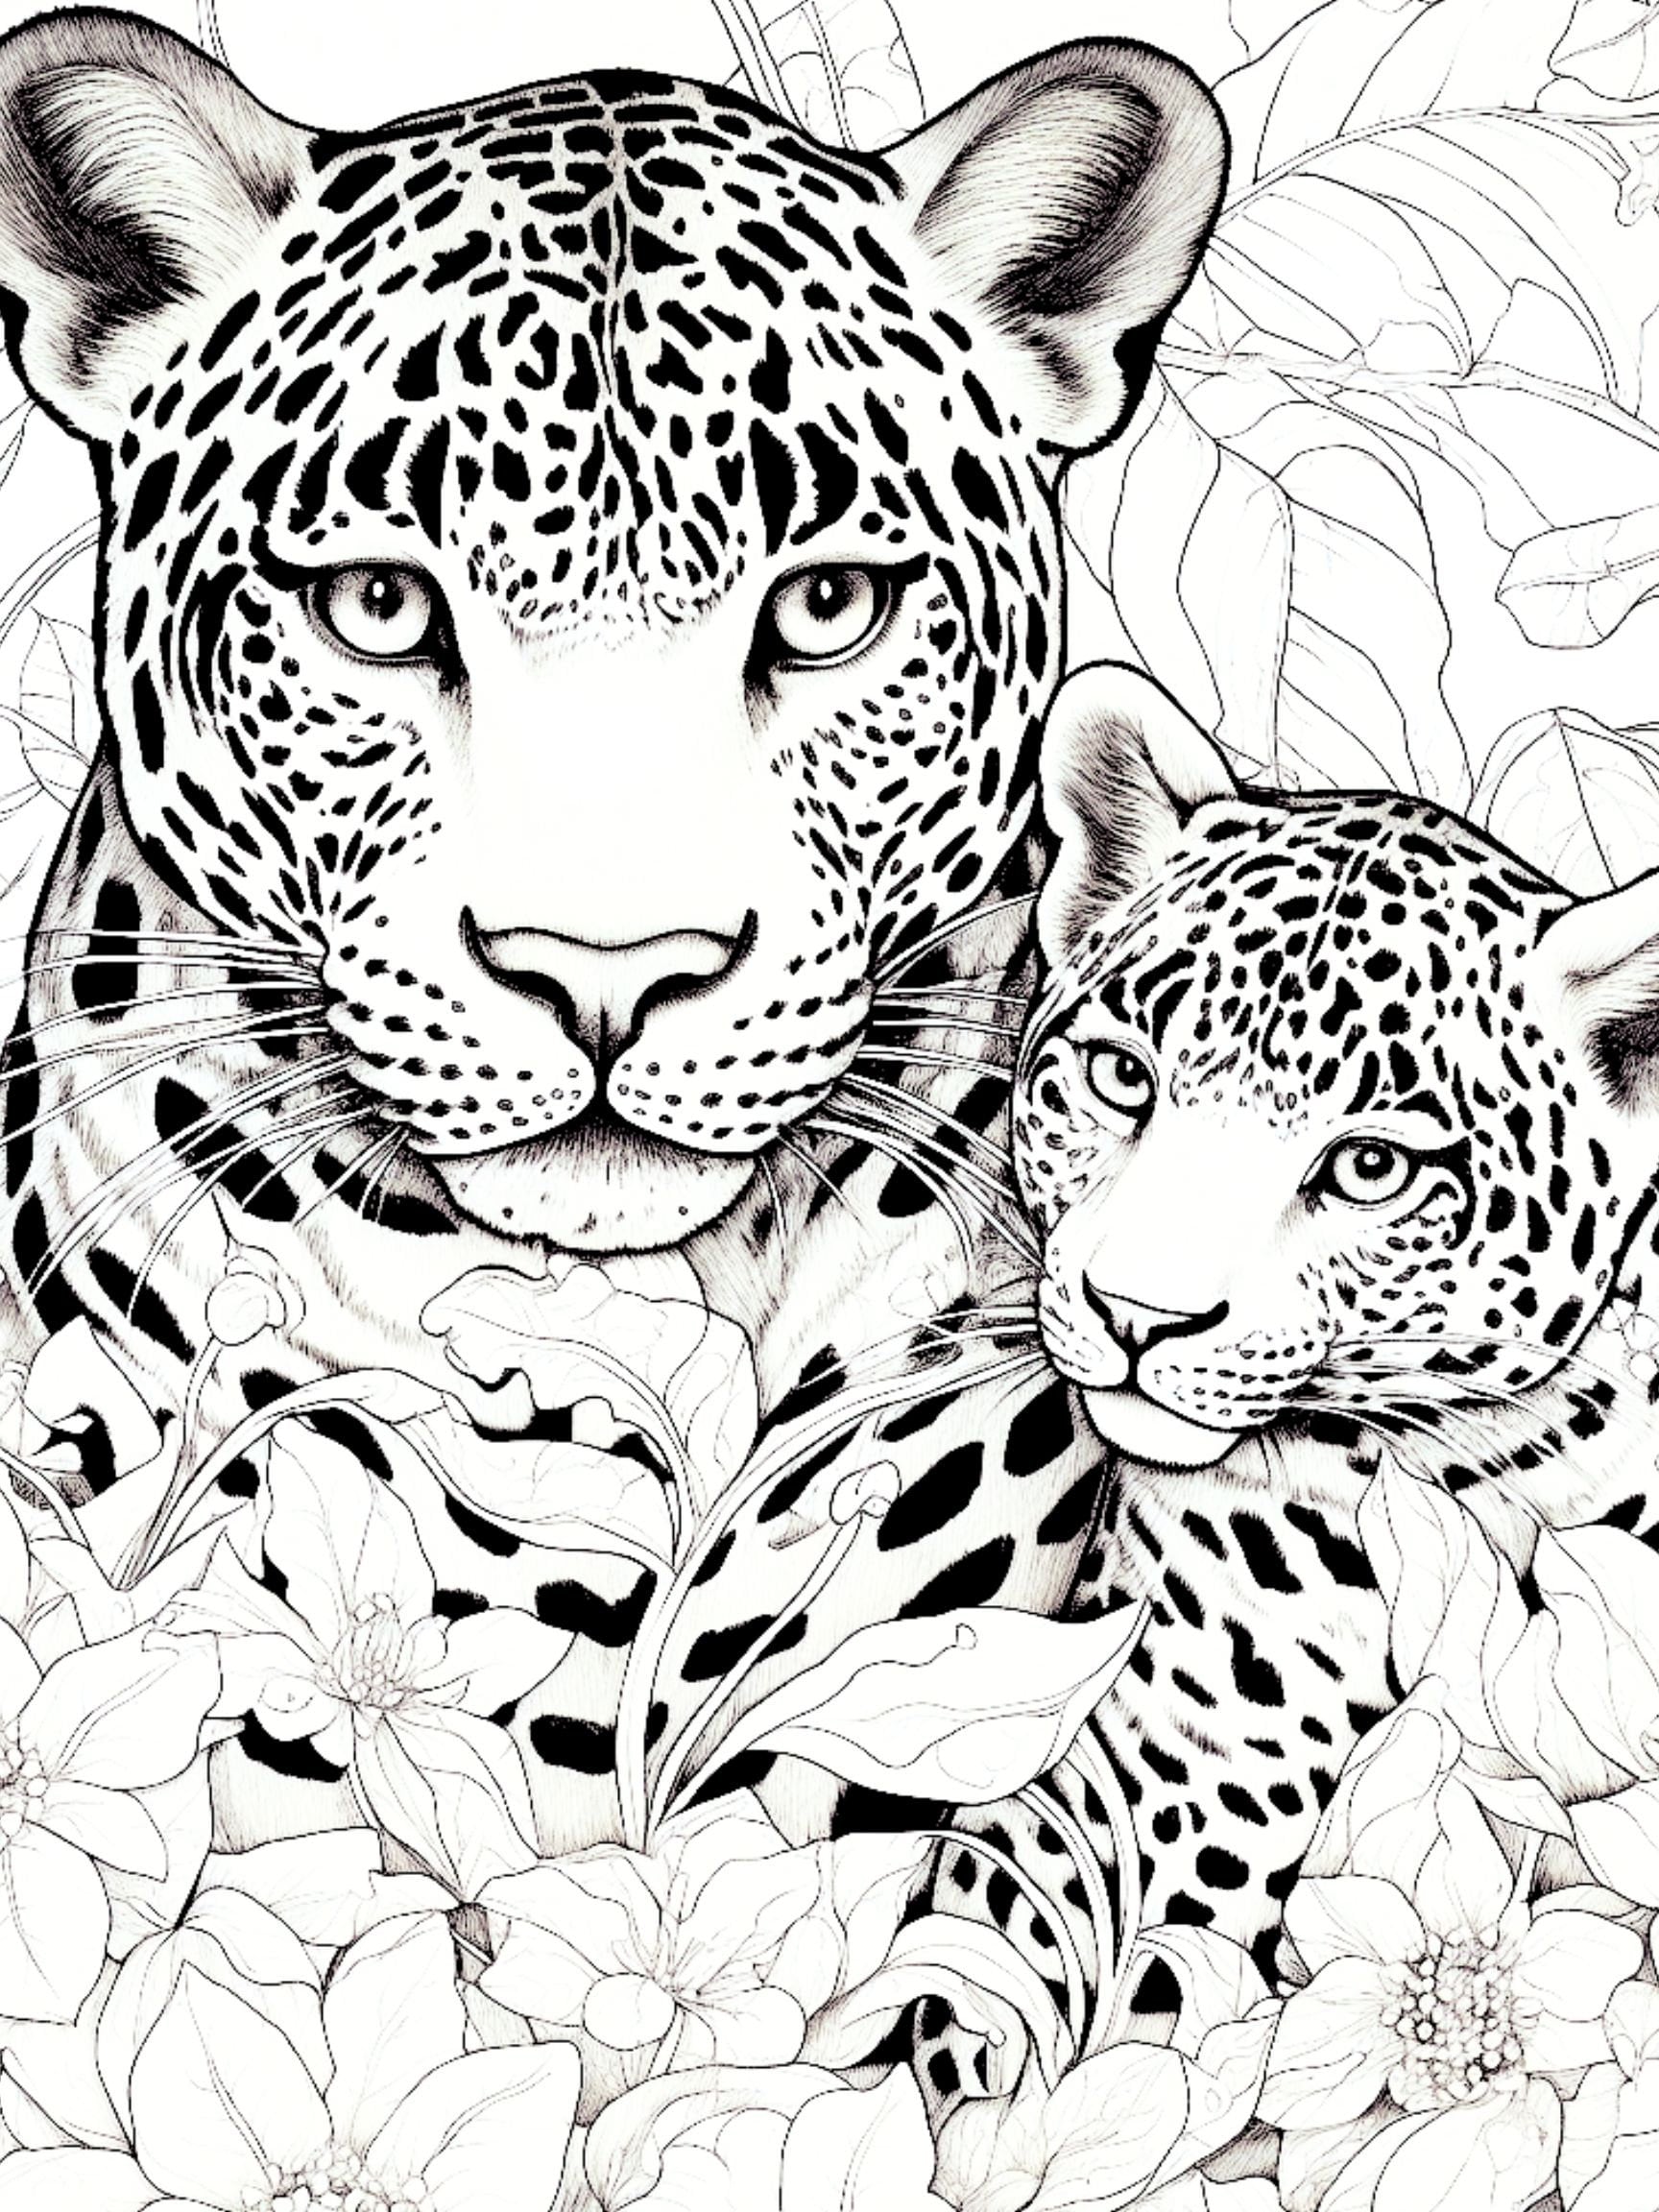 Wild and Free: 29 Panther Coloring Pages for Mindful Relaxation and ...